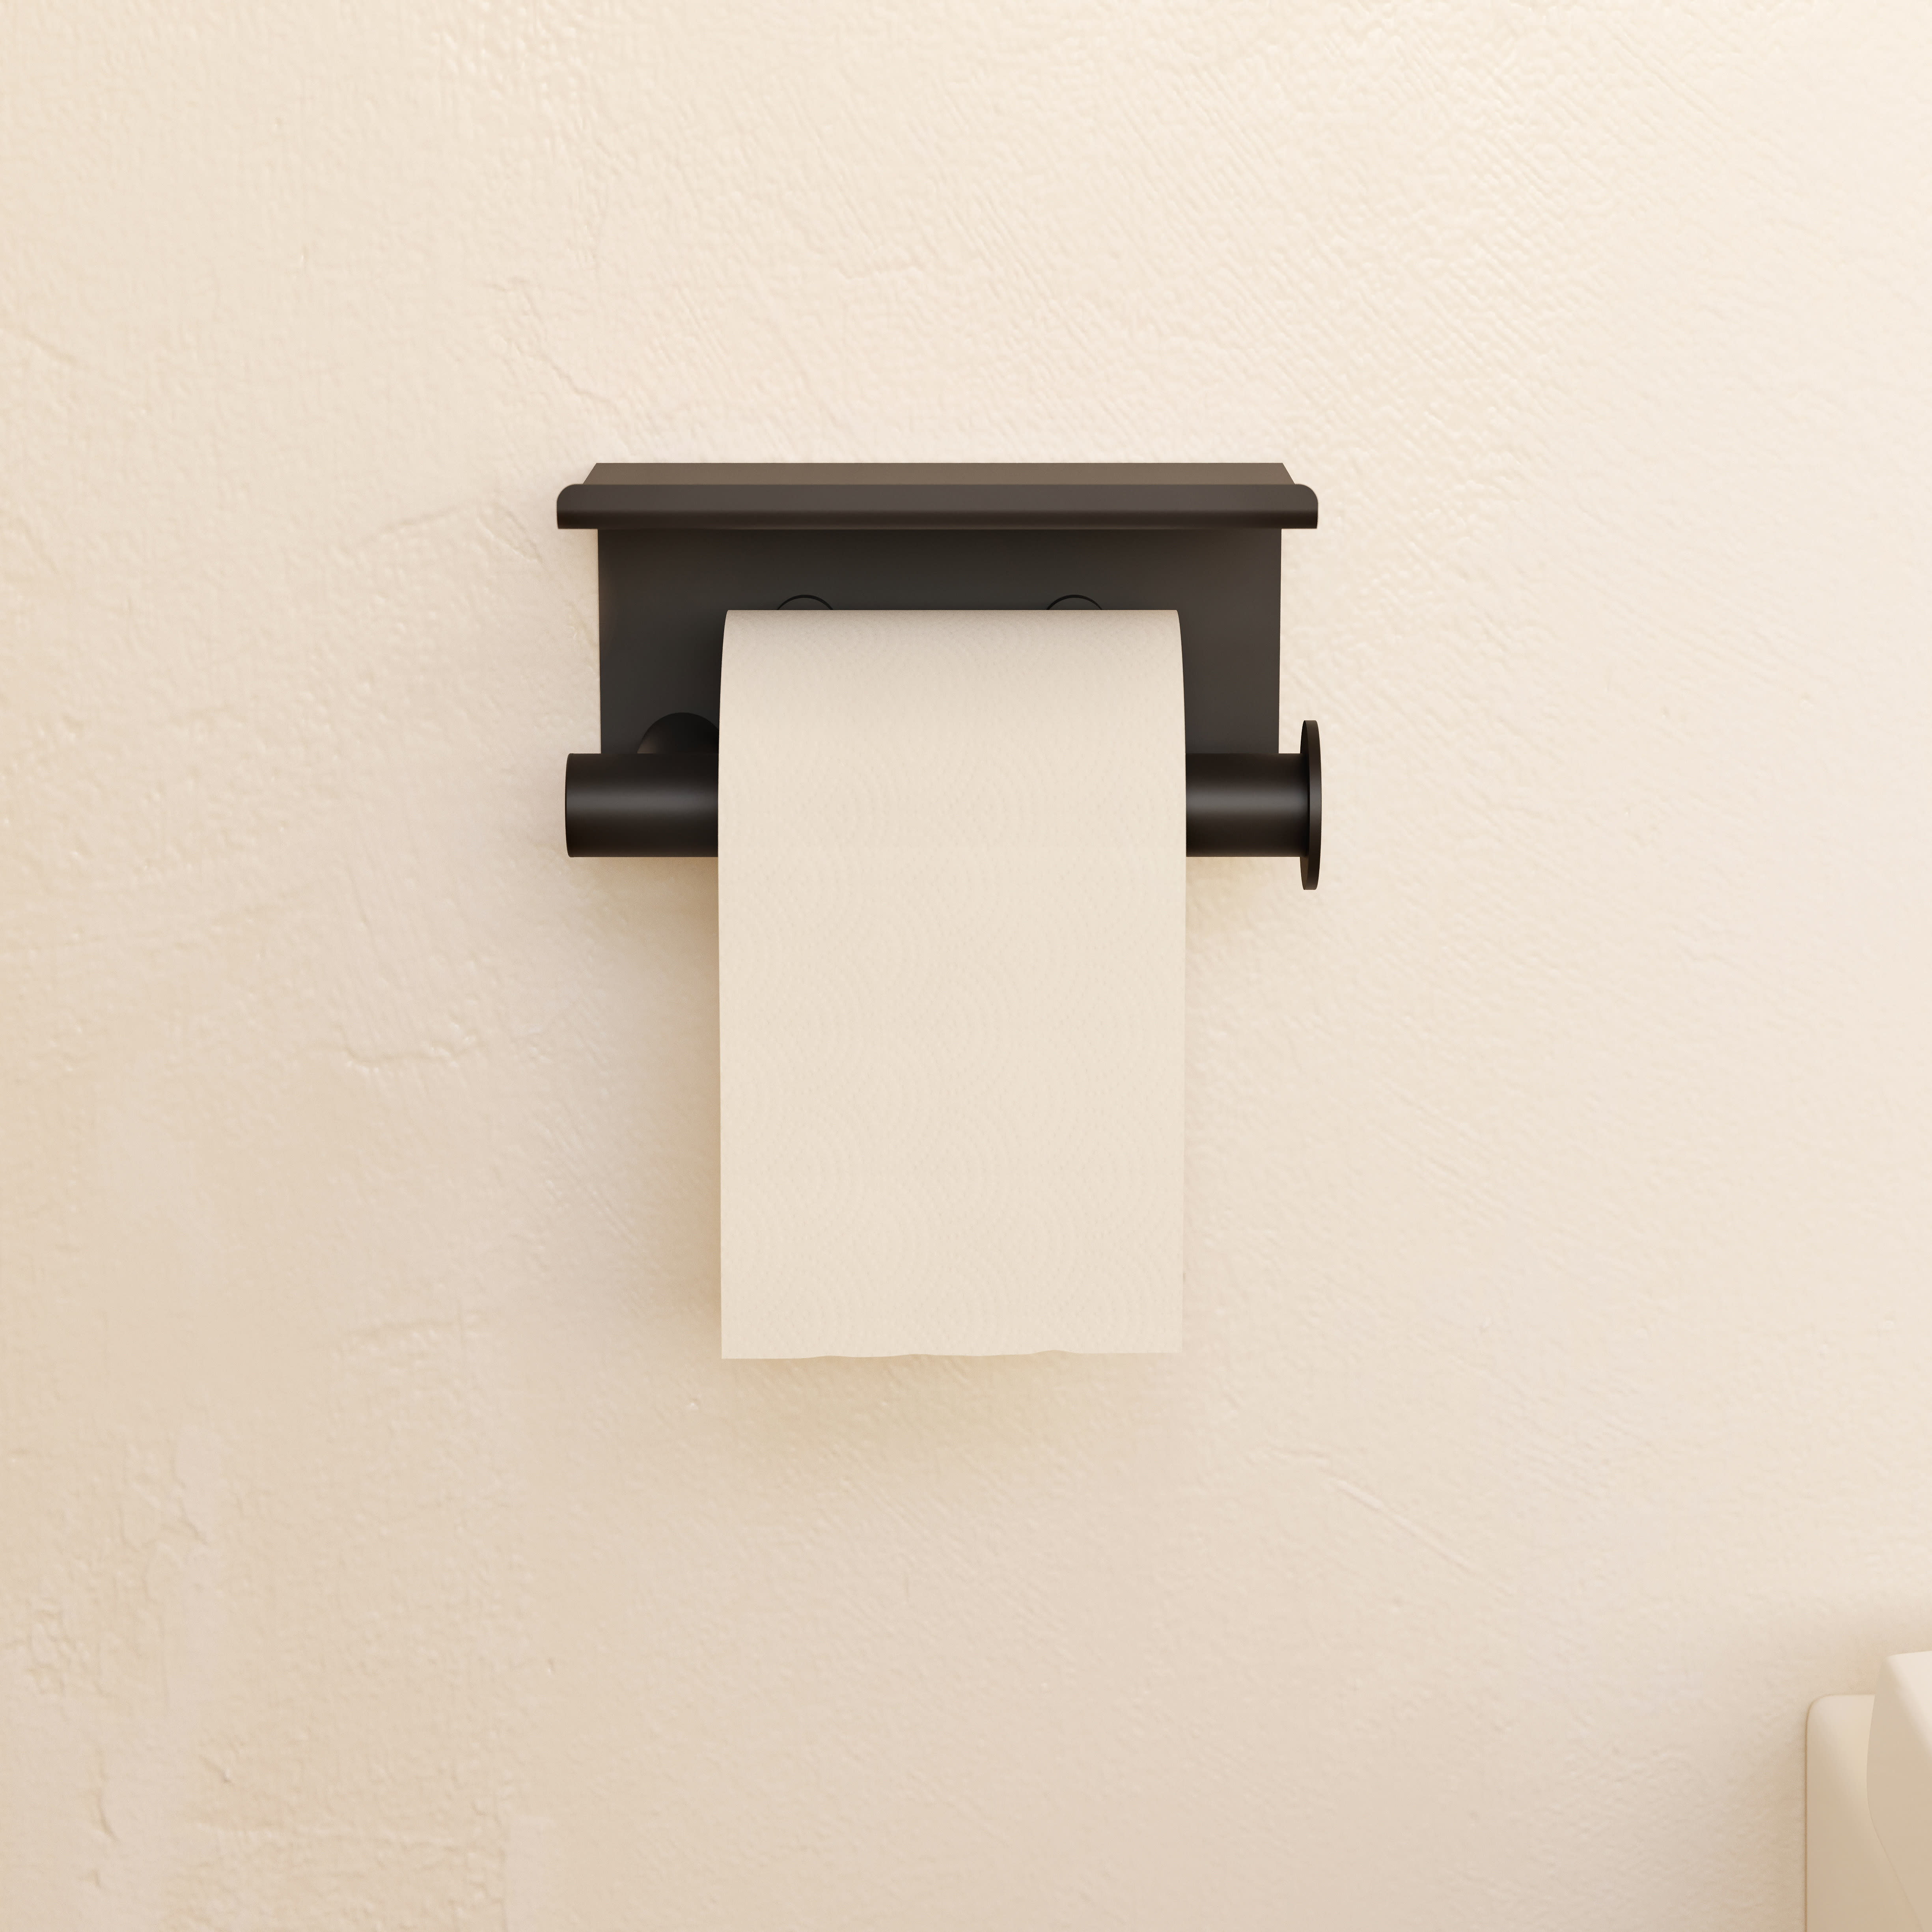 PAPER HOLDER WITH COVER